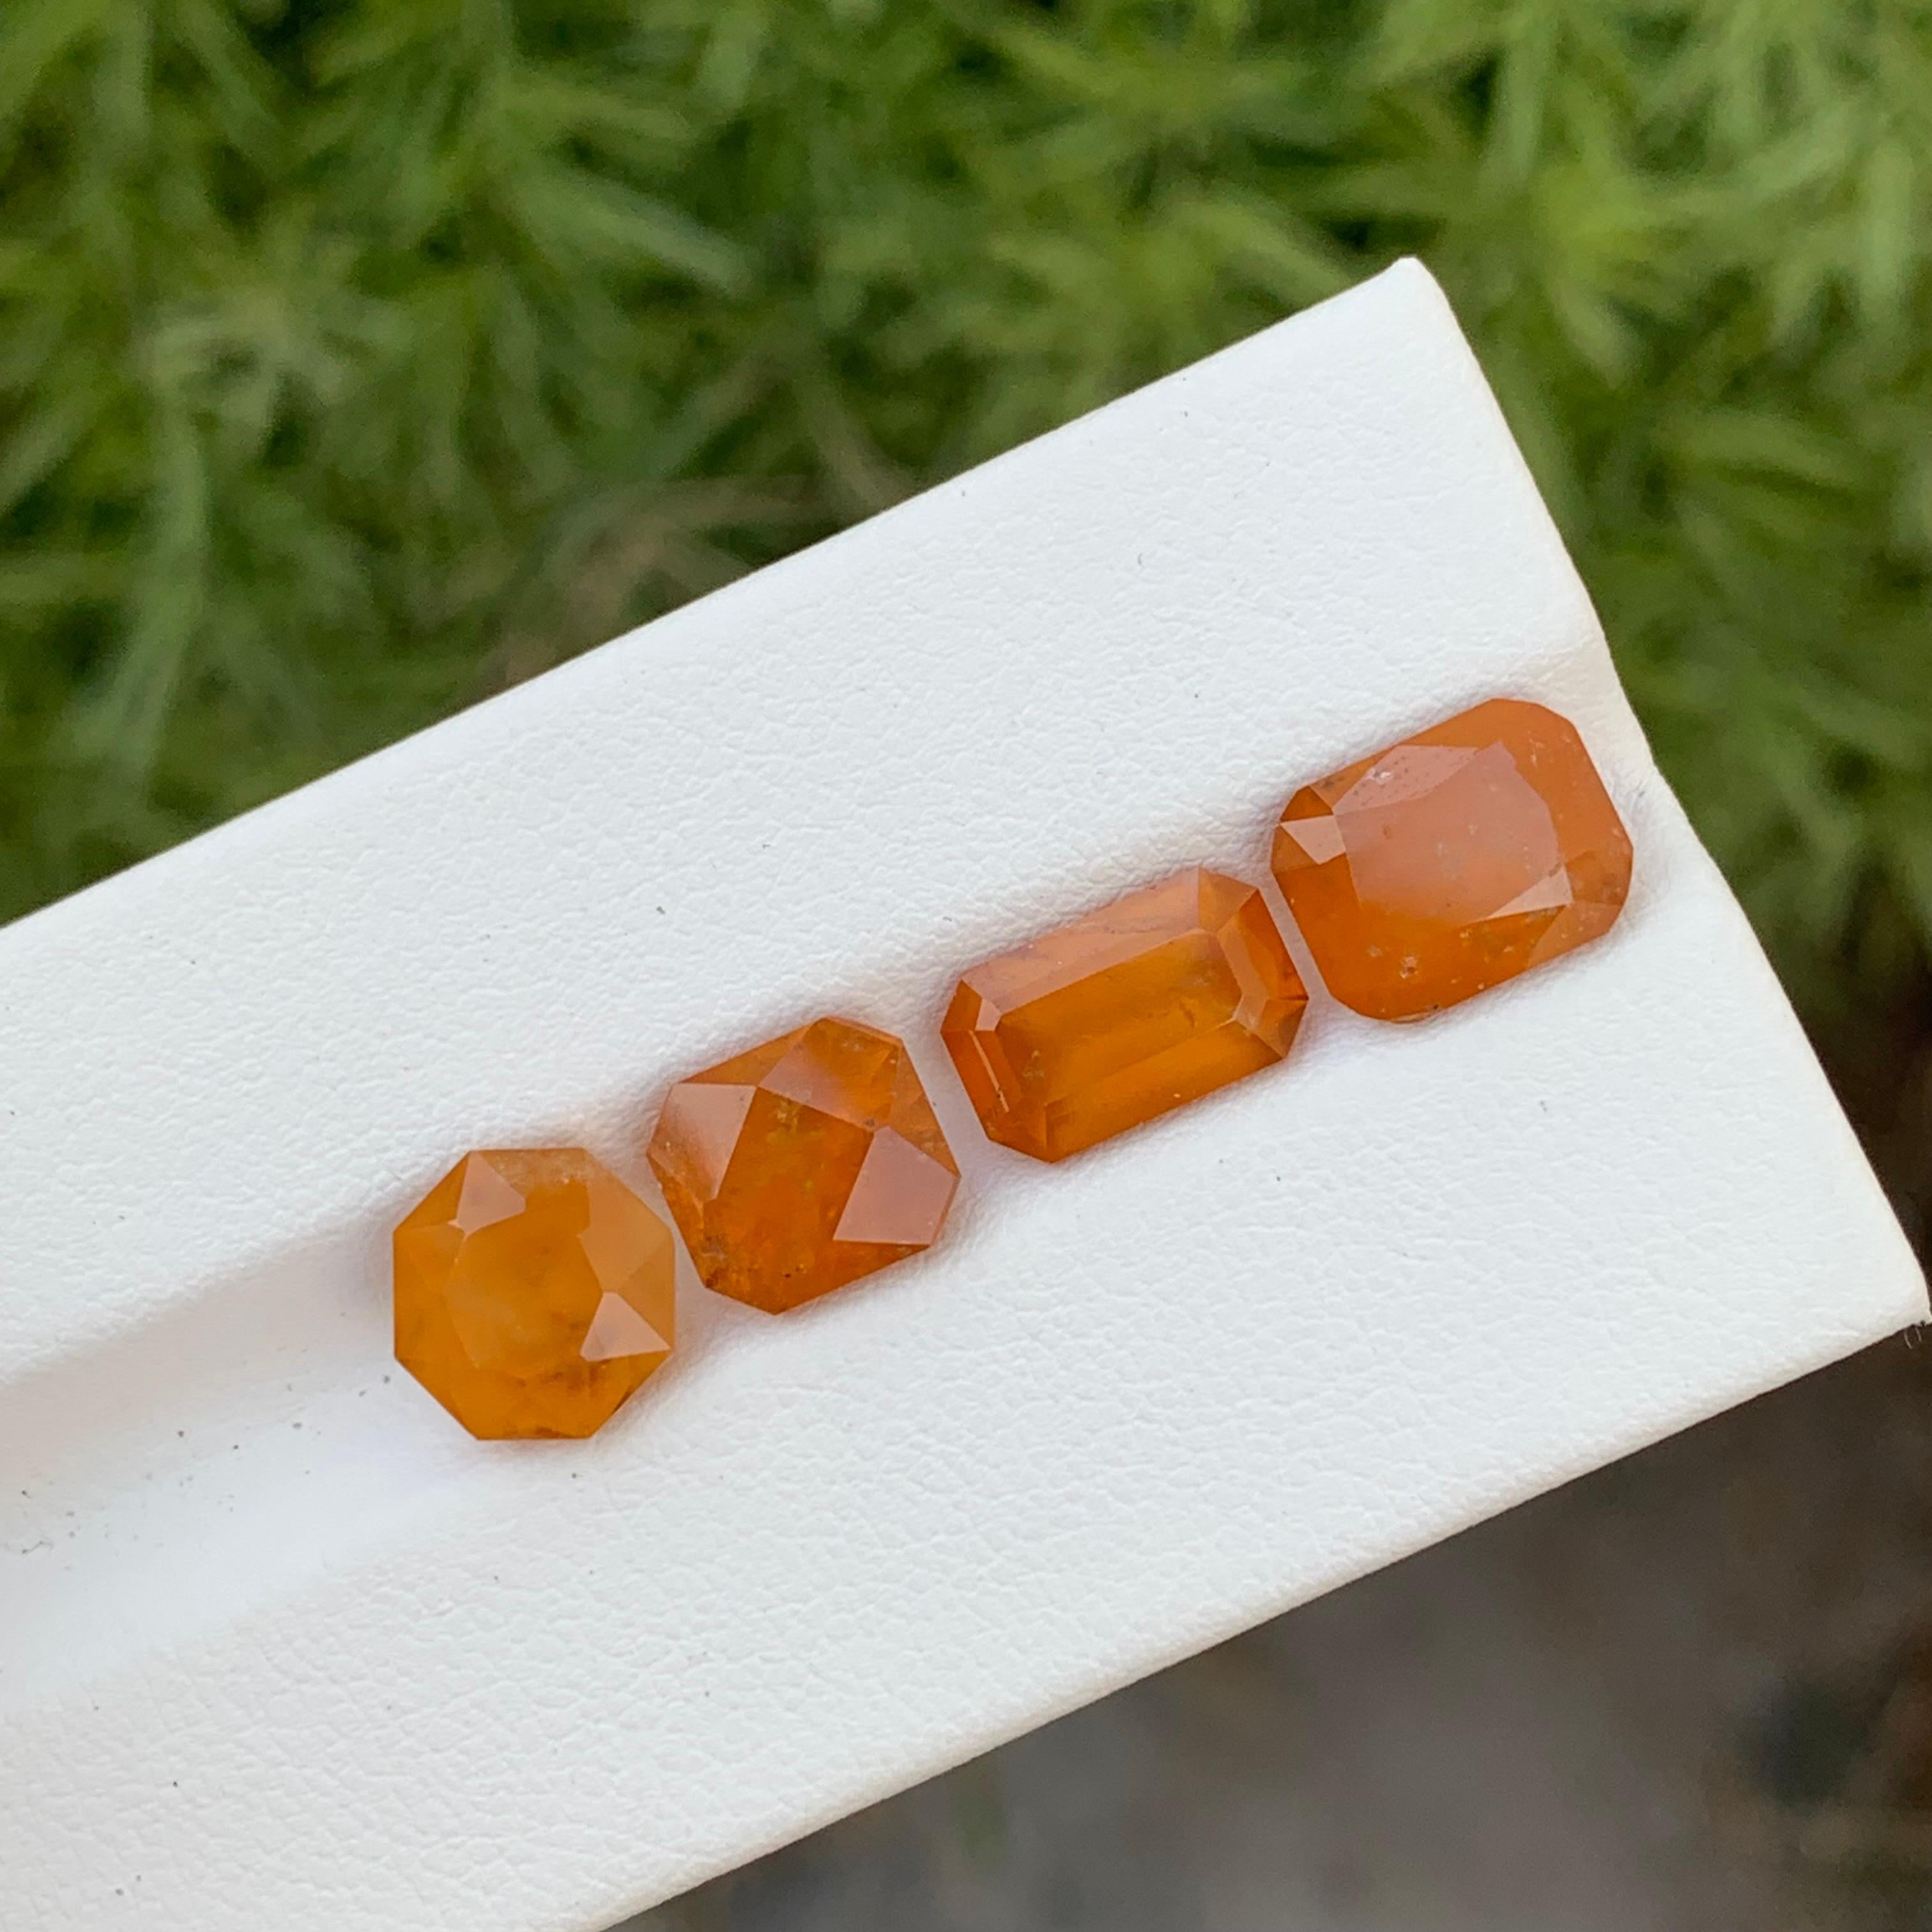 Women's or Men's  12.40 Carats Fanta Natural Loose Hessonite Smoky Garnet Lot For Jewelry Making For Sale